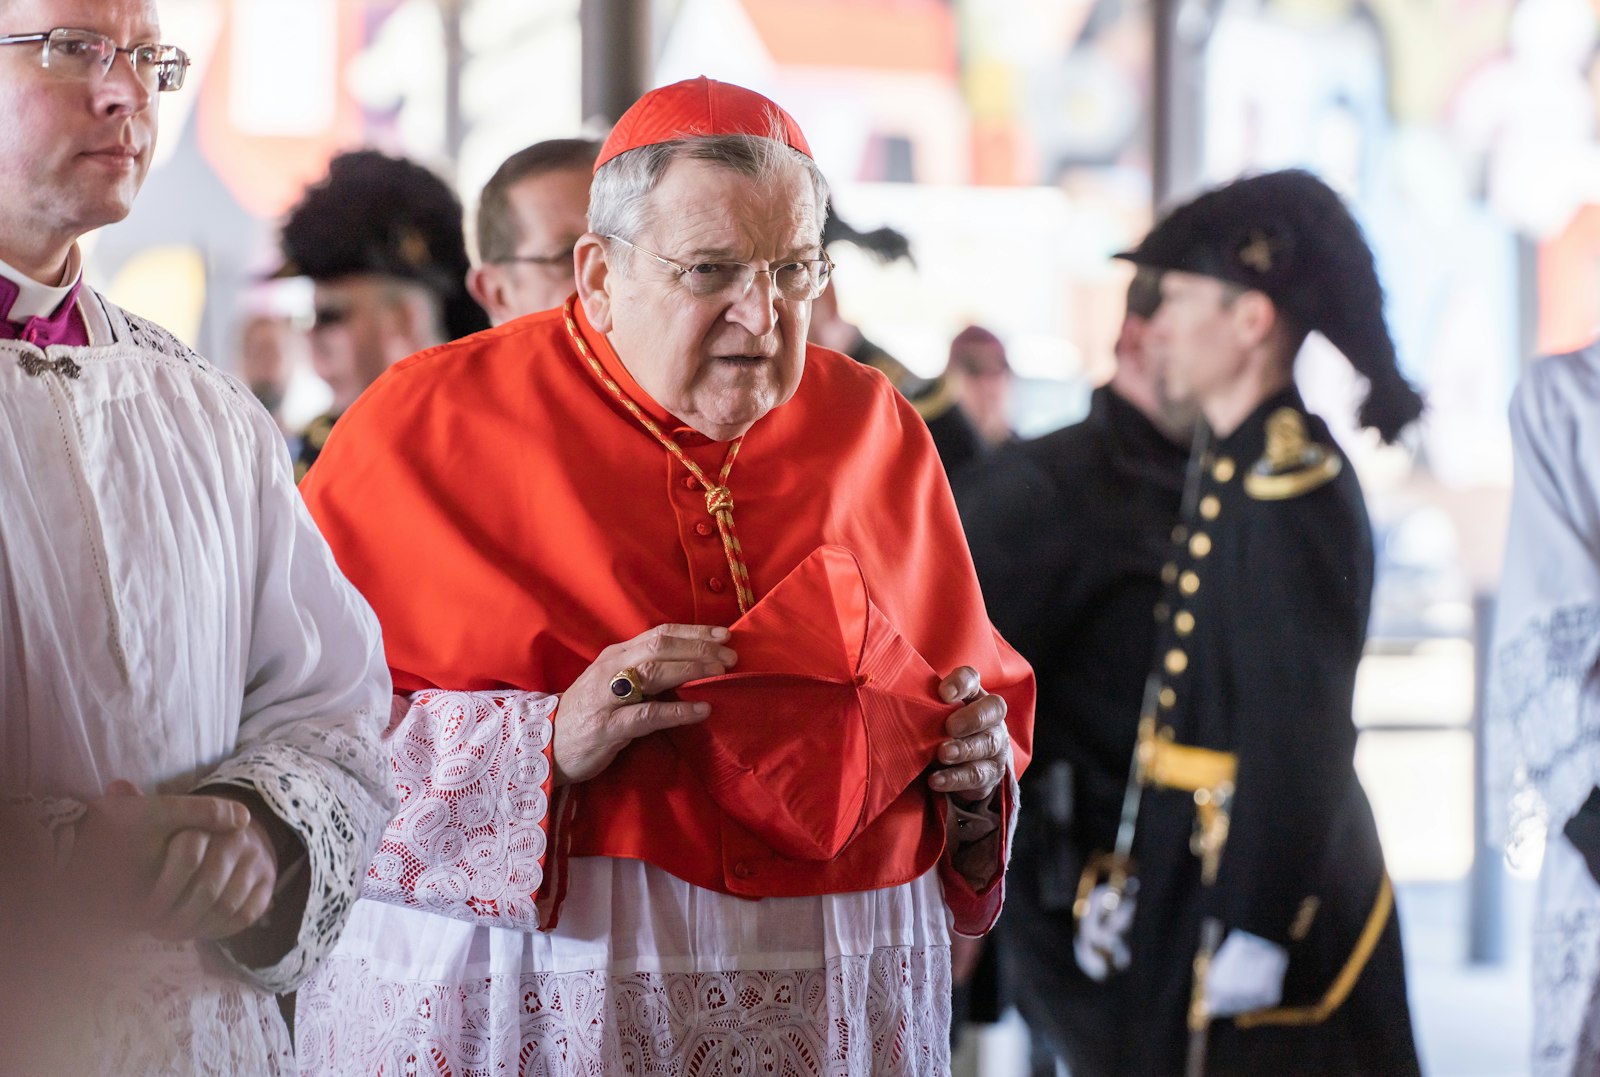 Cardinal Raymond Burke, former archbishop of St. Louis and former prefect of the Apostolic Signatura, the Vatican's highest court, participates in a procession with a statue of St. Joseph on March 20, the feast of St. Joseph, outside St. Joseph Shrine near Detroit's Eastern Market.